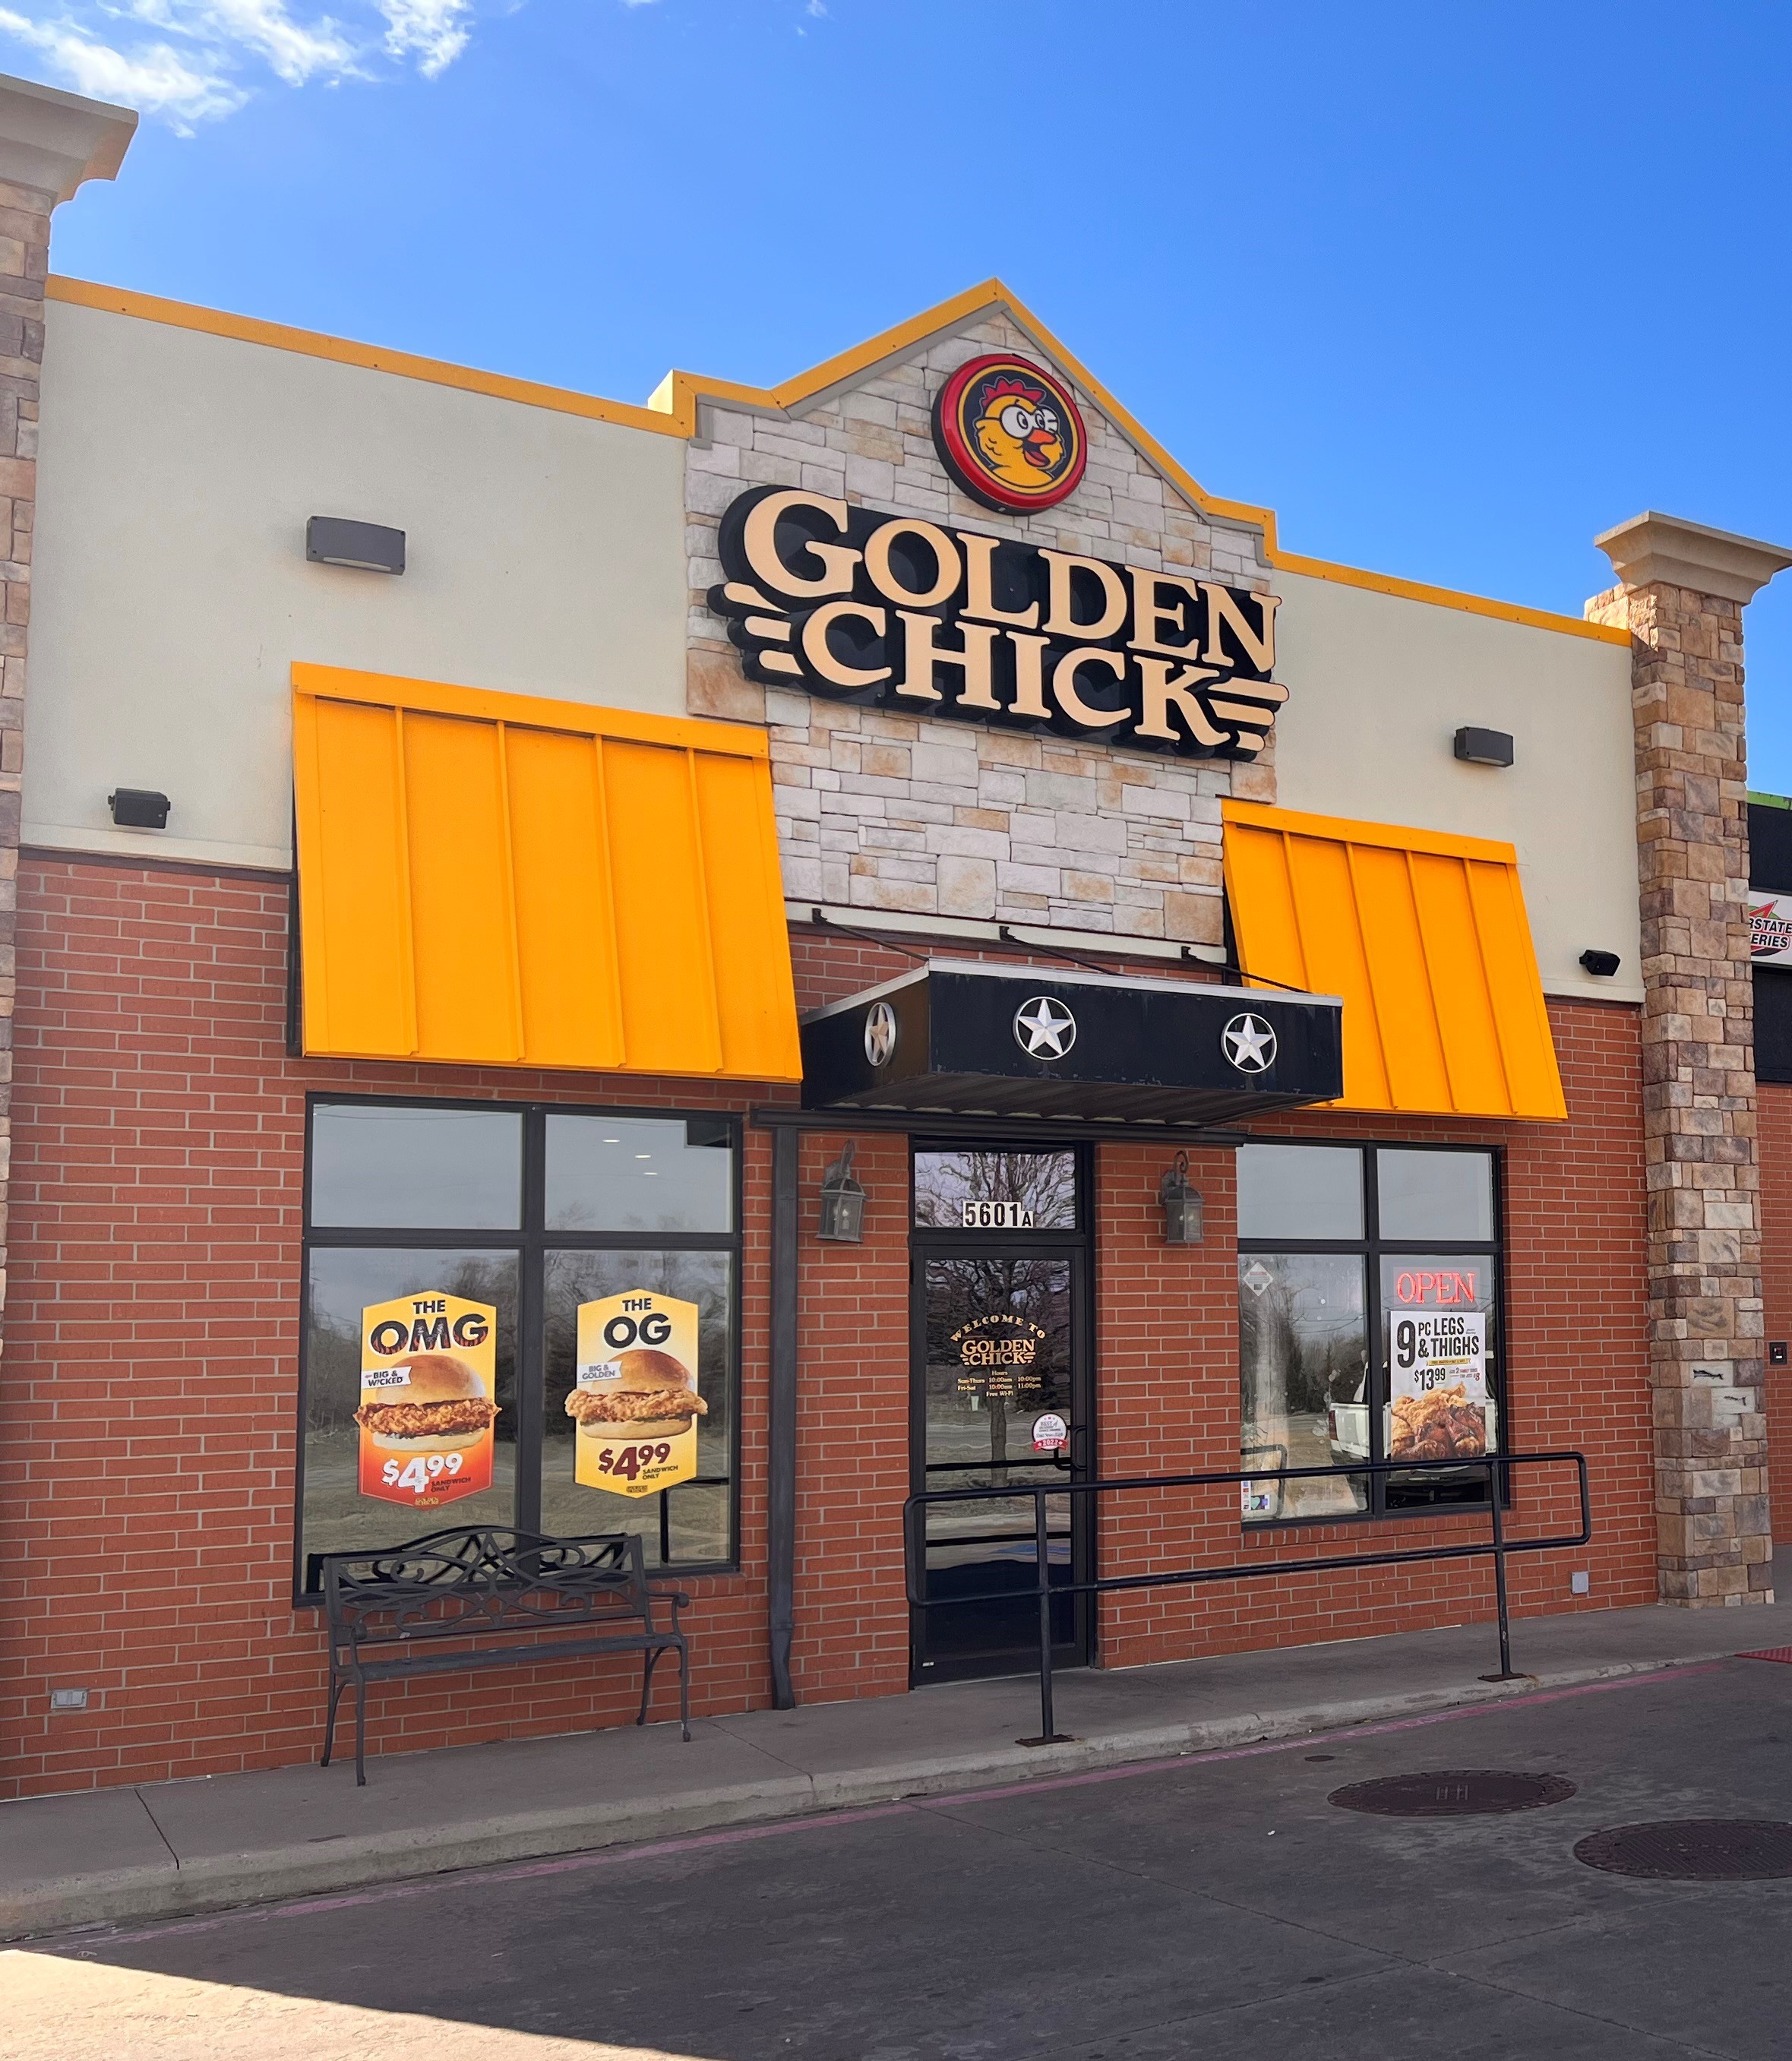 Golden Chick storefront.  Your local Golden Chick fast food restaurant in Enid, Oklahoma